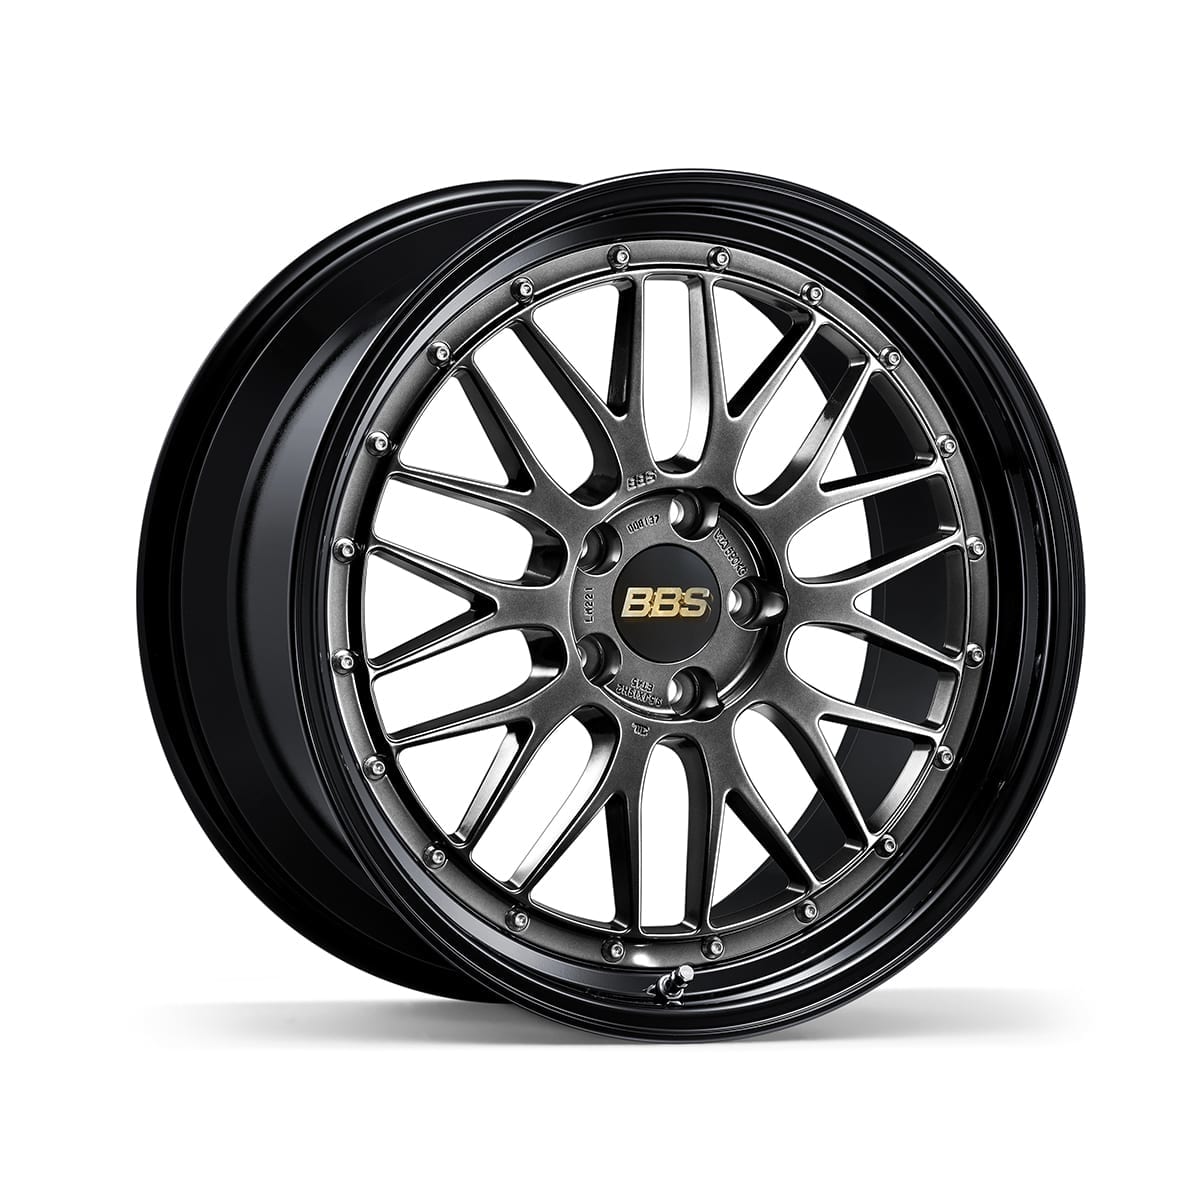 BBS LM LM-R 2018 limited edition 限定